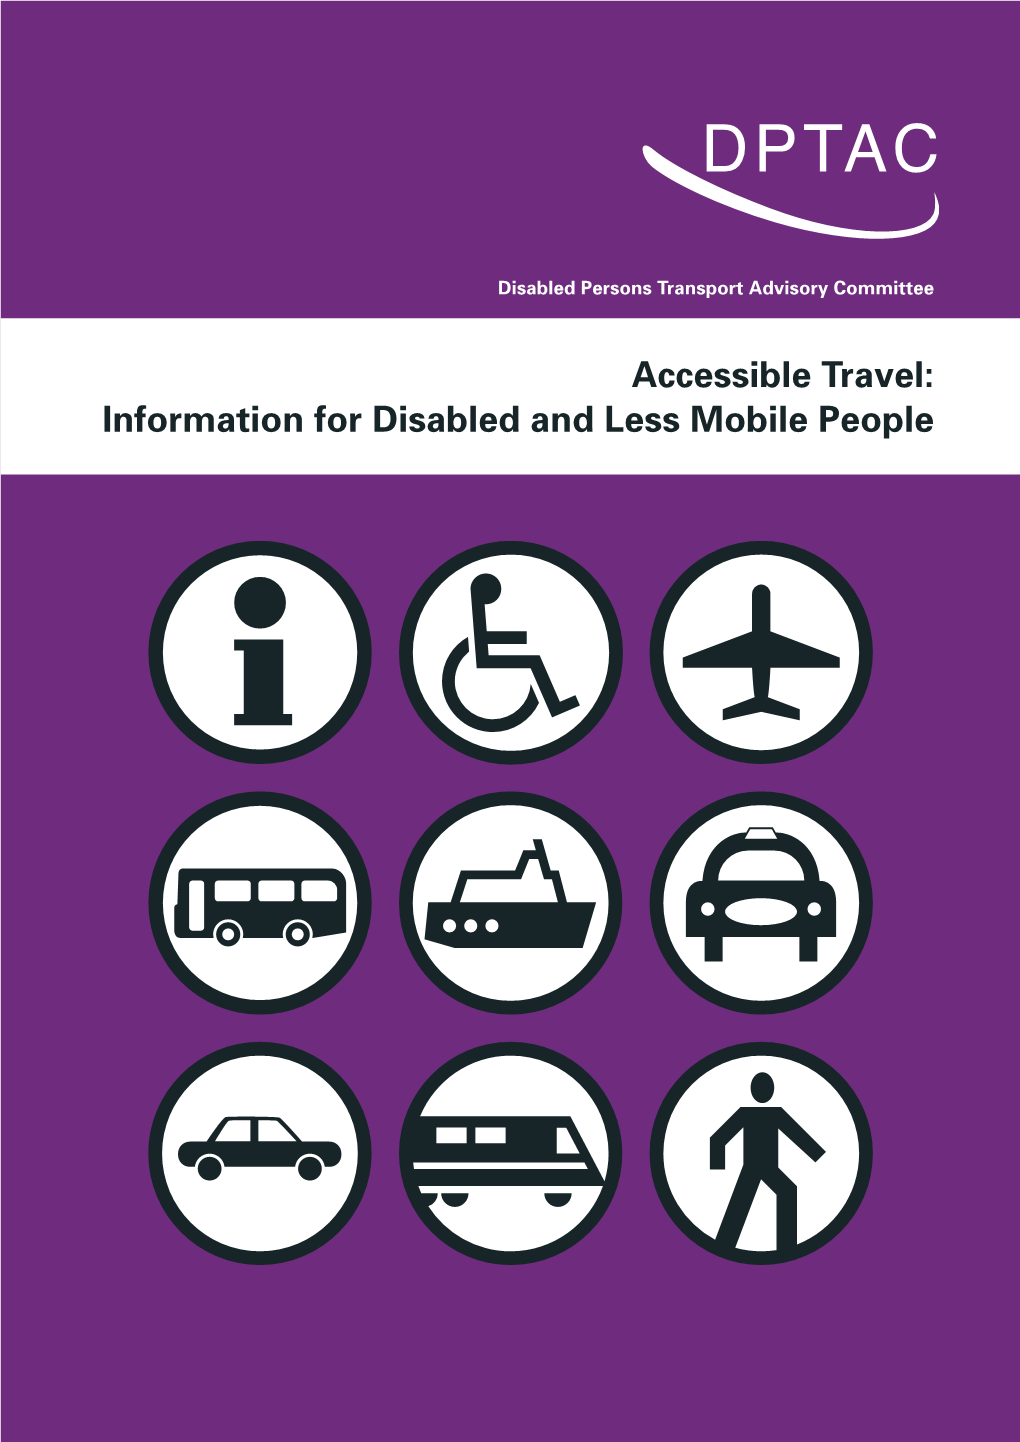 Accessible Travel: Information for Disabled and Less Mobile People